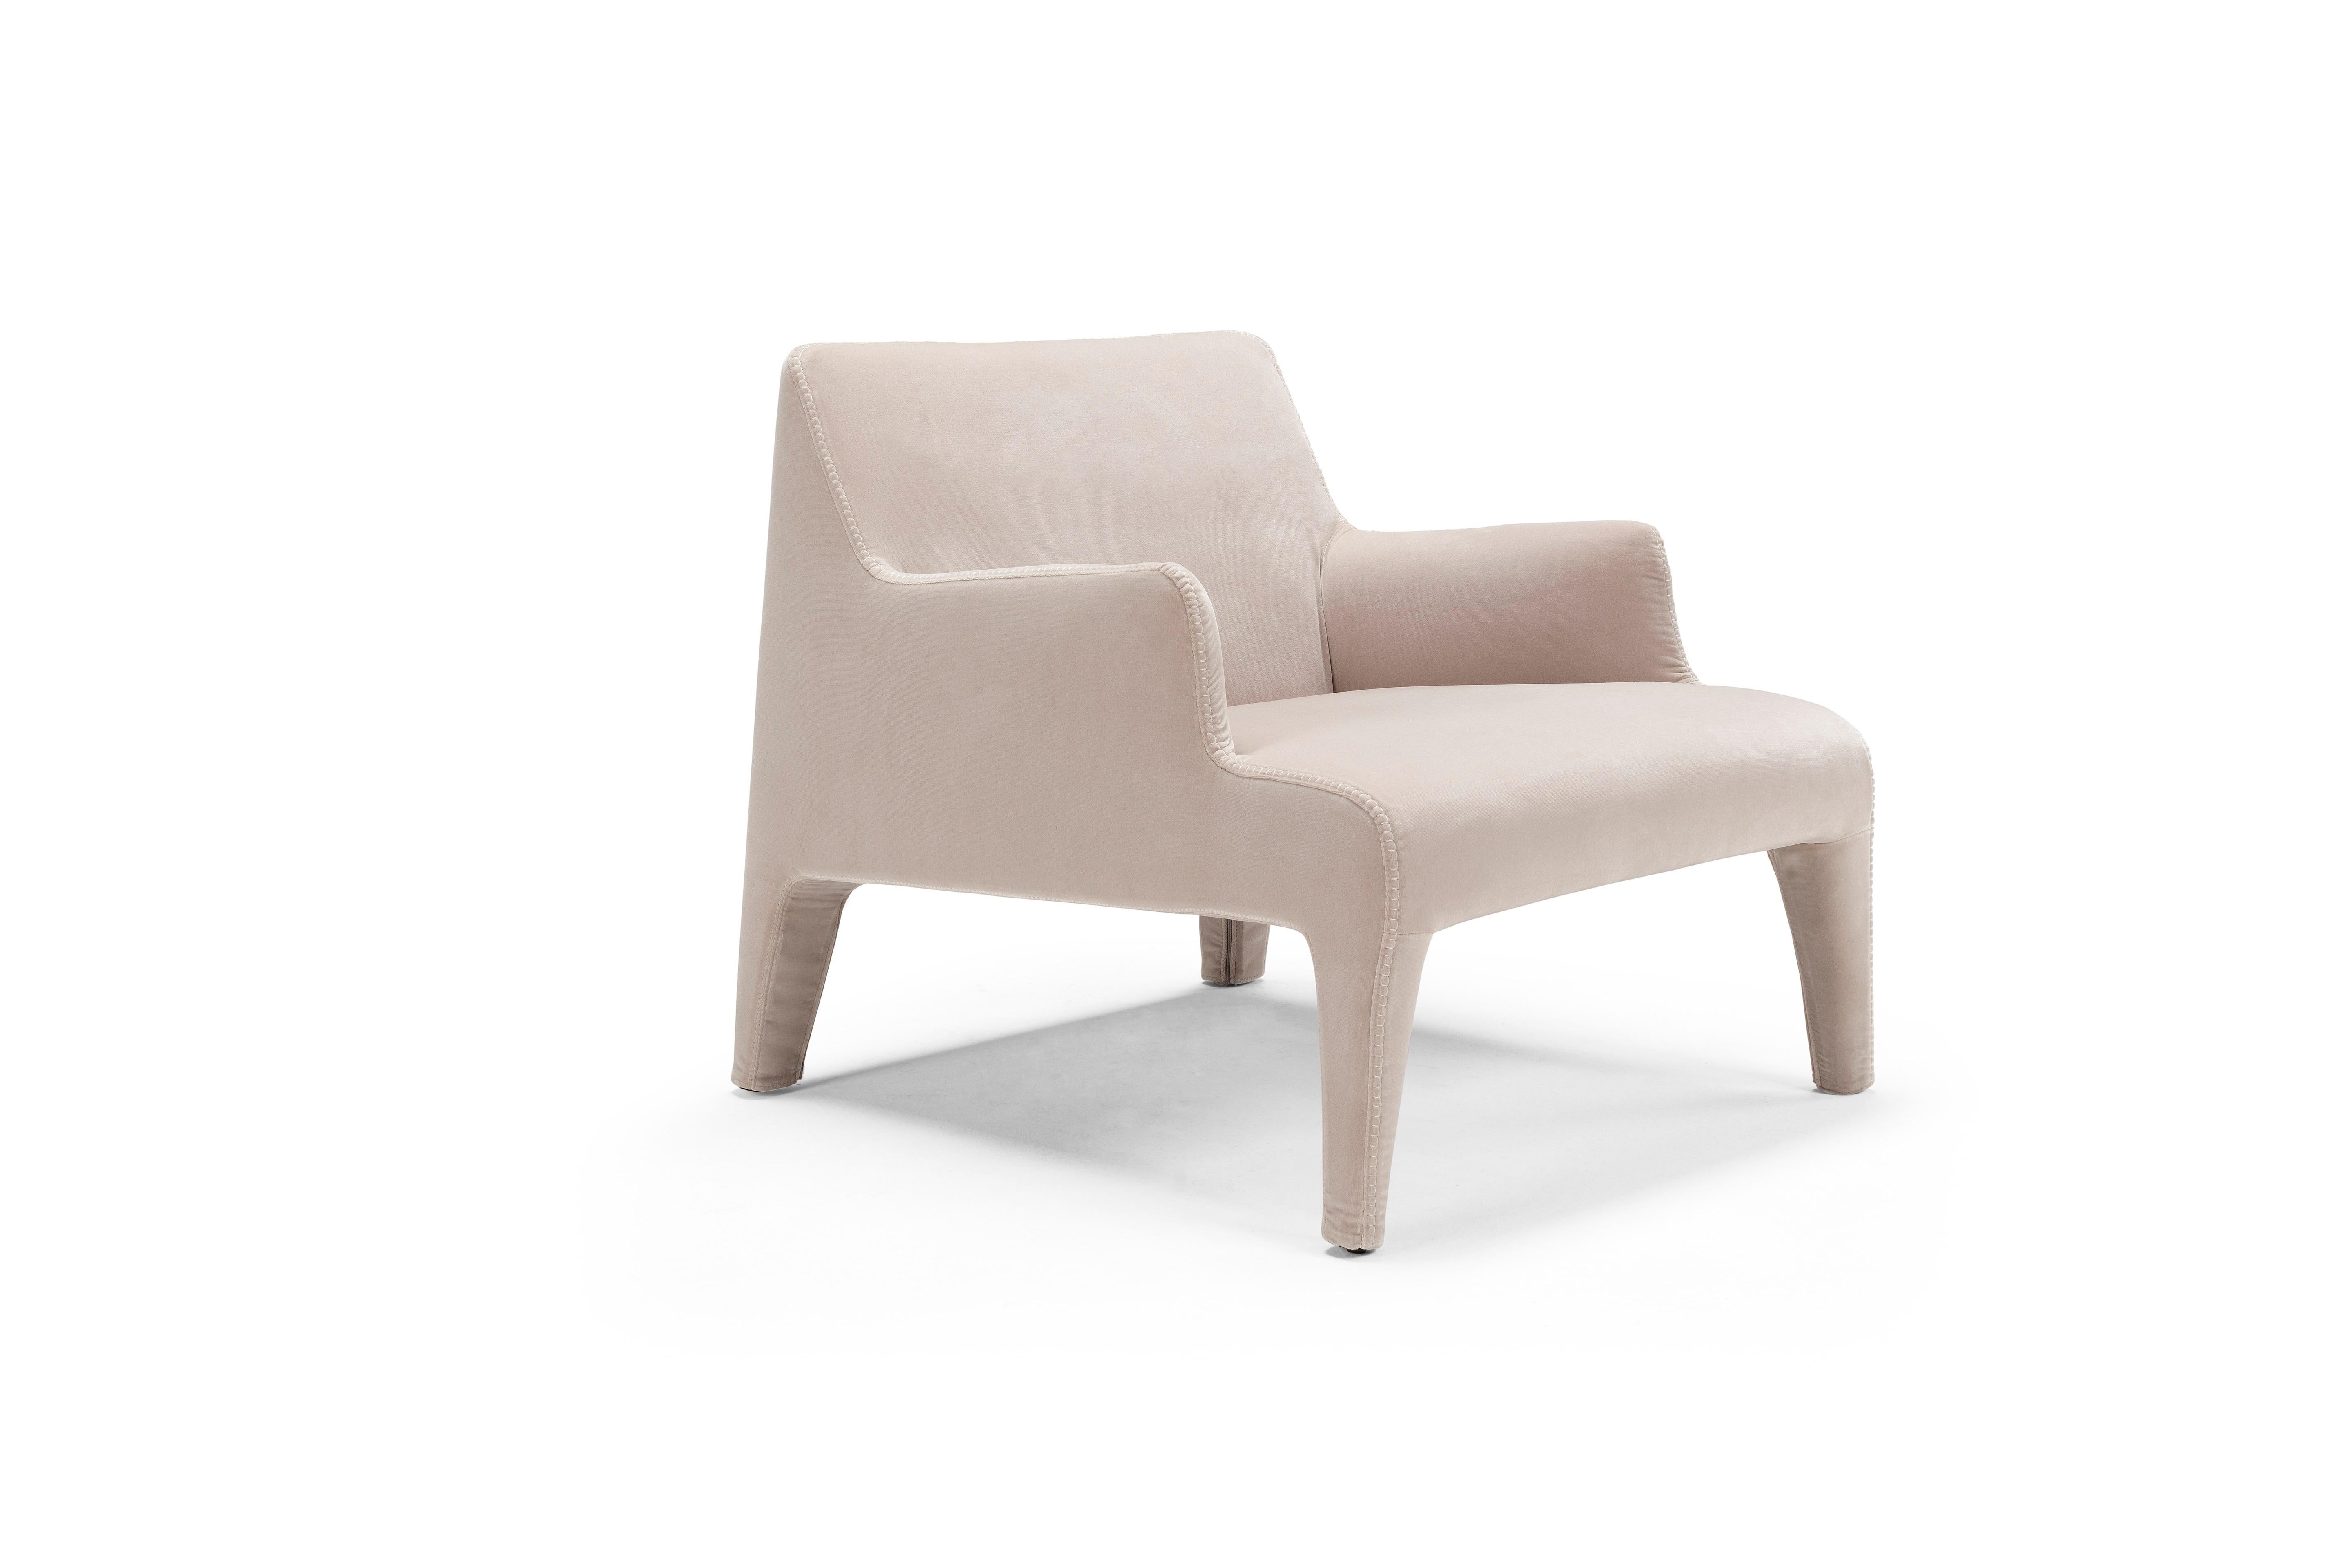 A good sense of proportion and style characterize Frida, a chair that combines comfort and harmony of form. The blanket stitching of the cover (which may be in fabric or leather) enhance the clean, uniform, and almost seamless lines and highlight